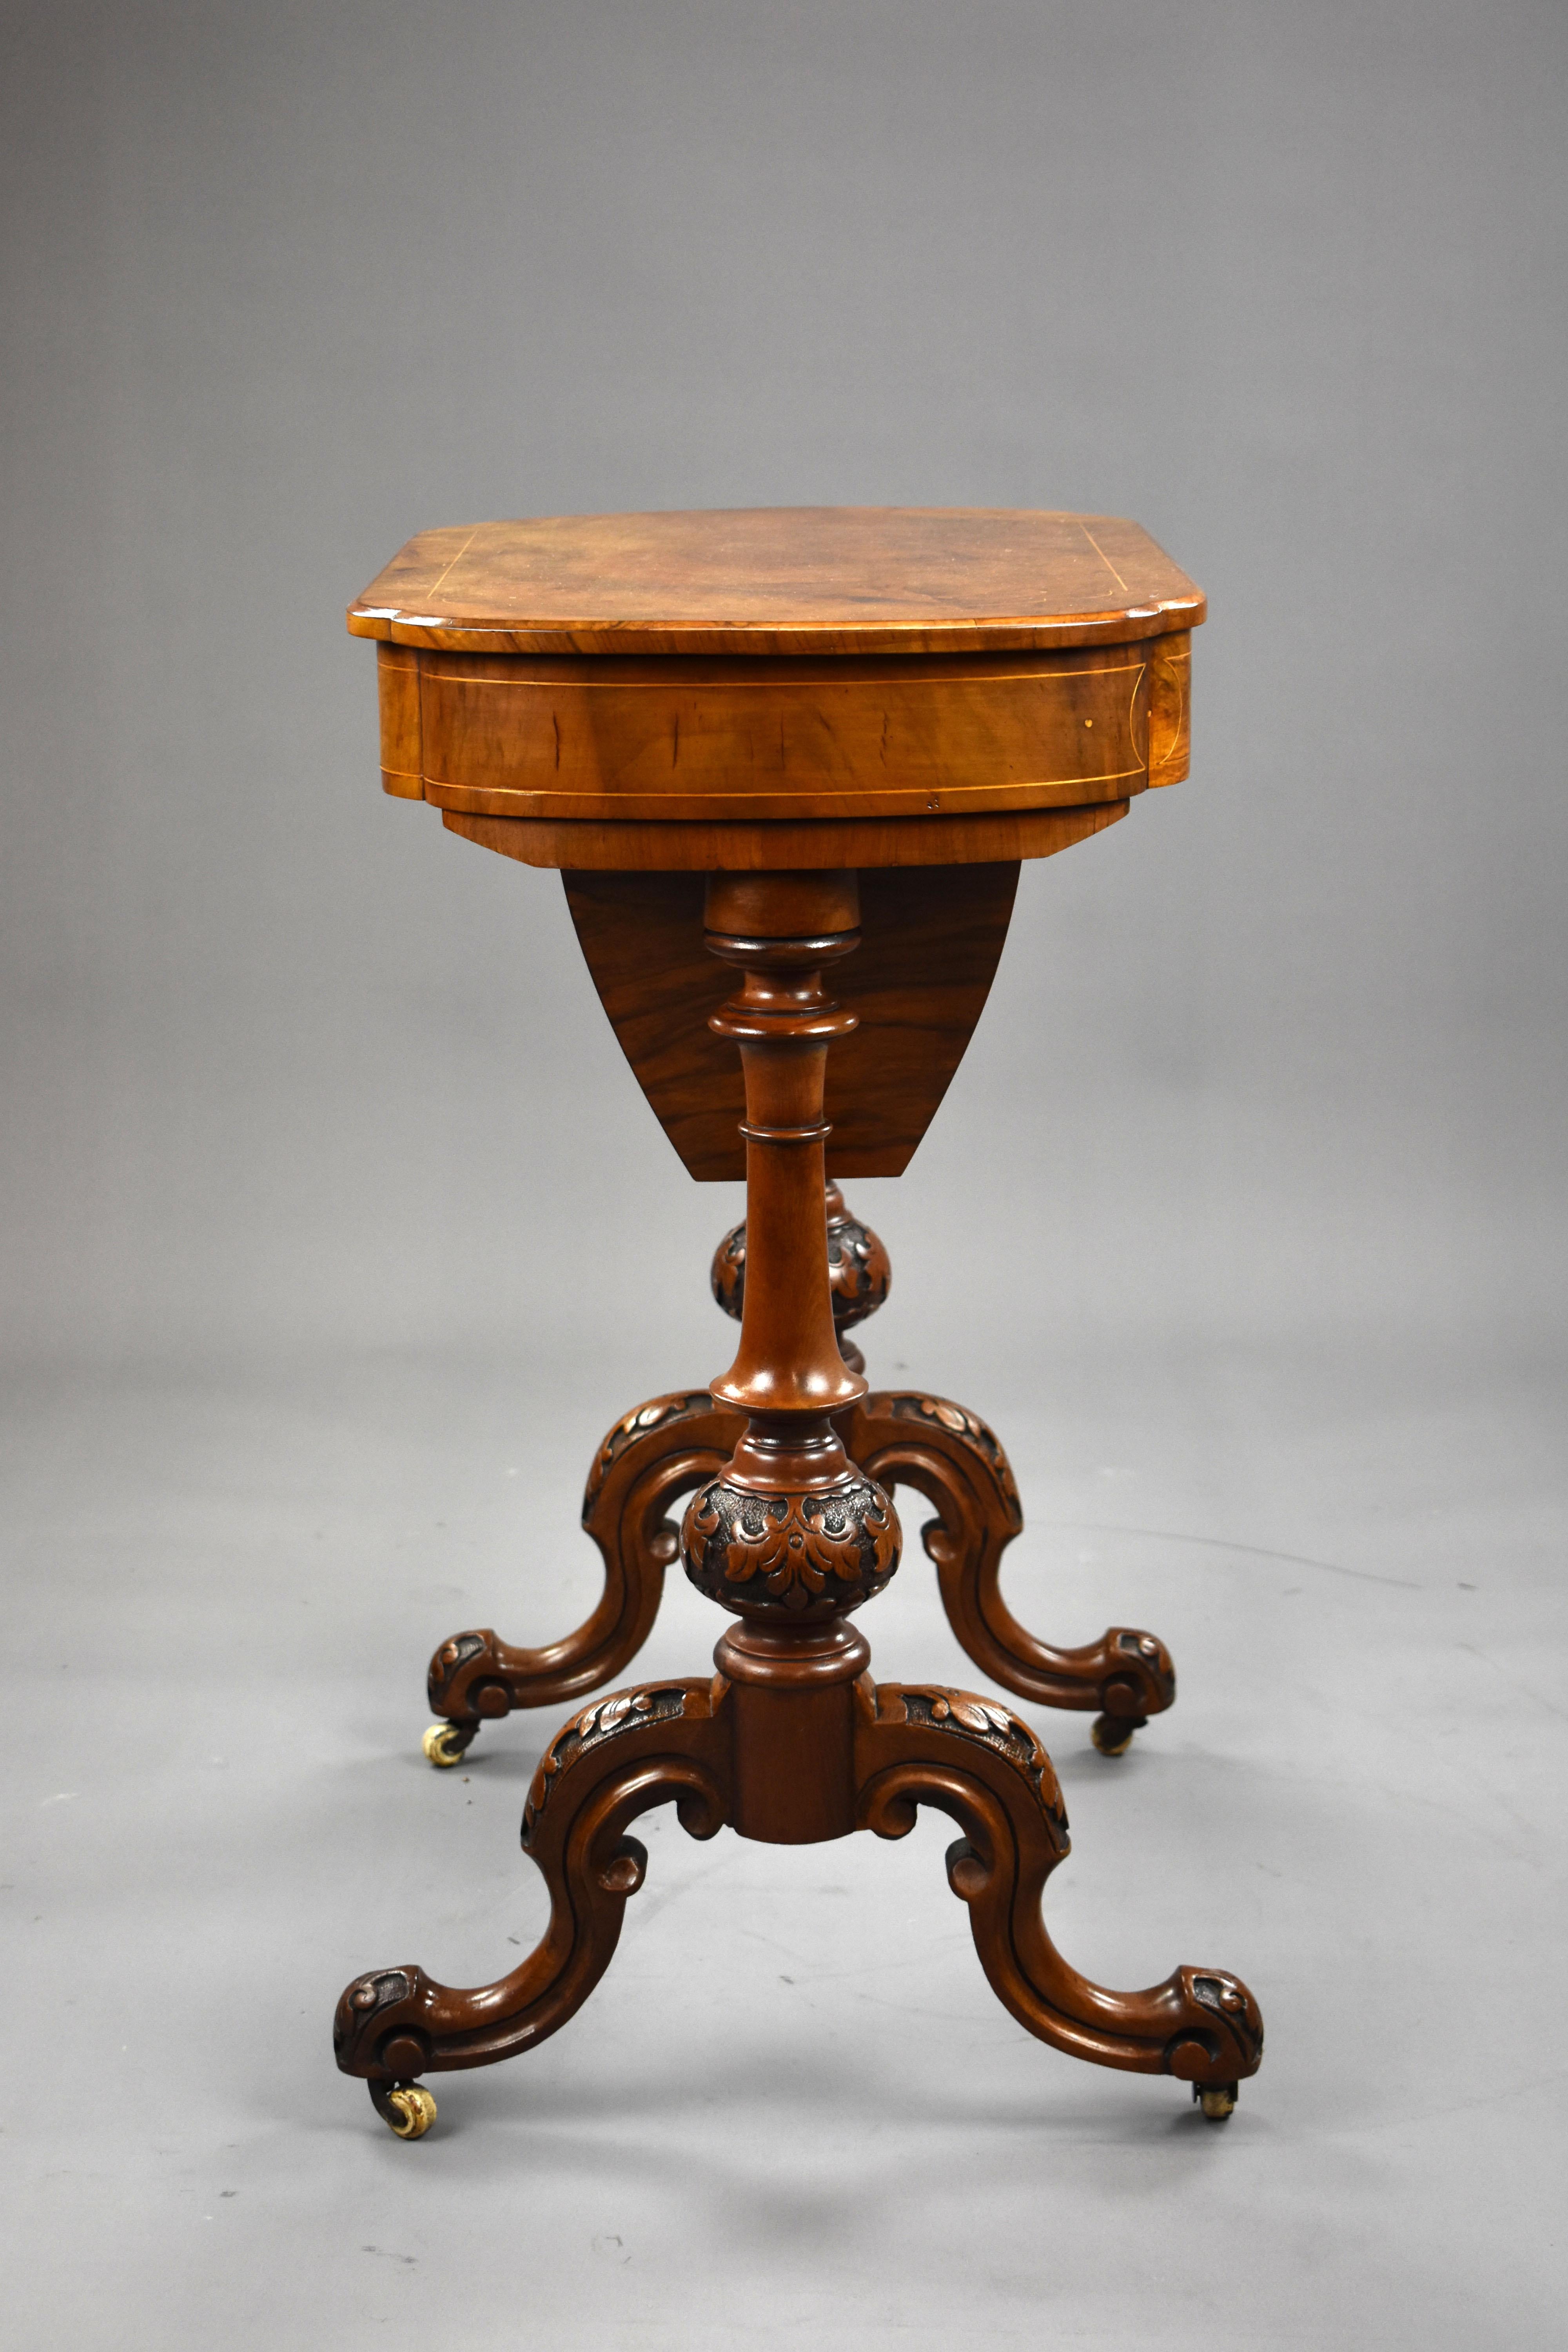 19th Century Victorian Burr Walnut Needlework Table In Excellent Condition For Sale In Chelmsford, Essex